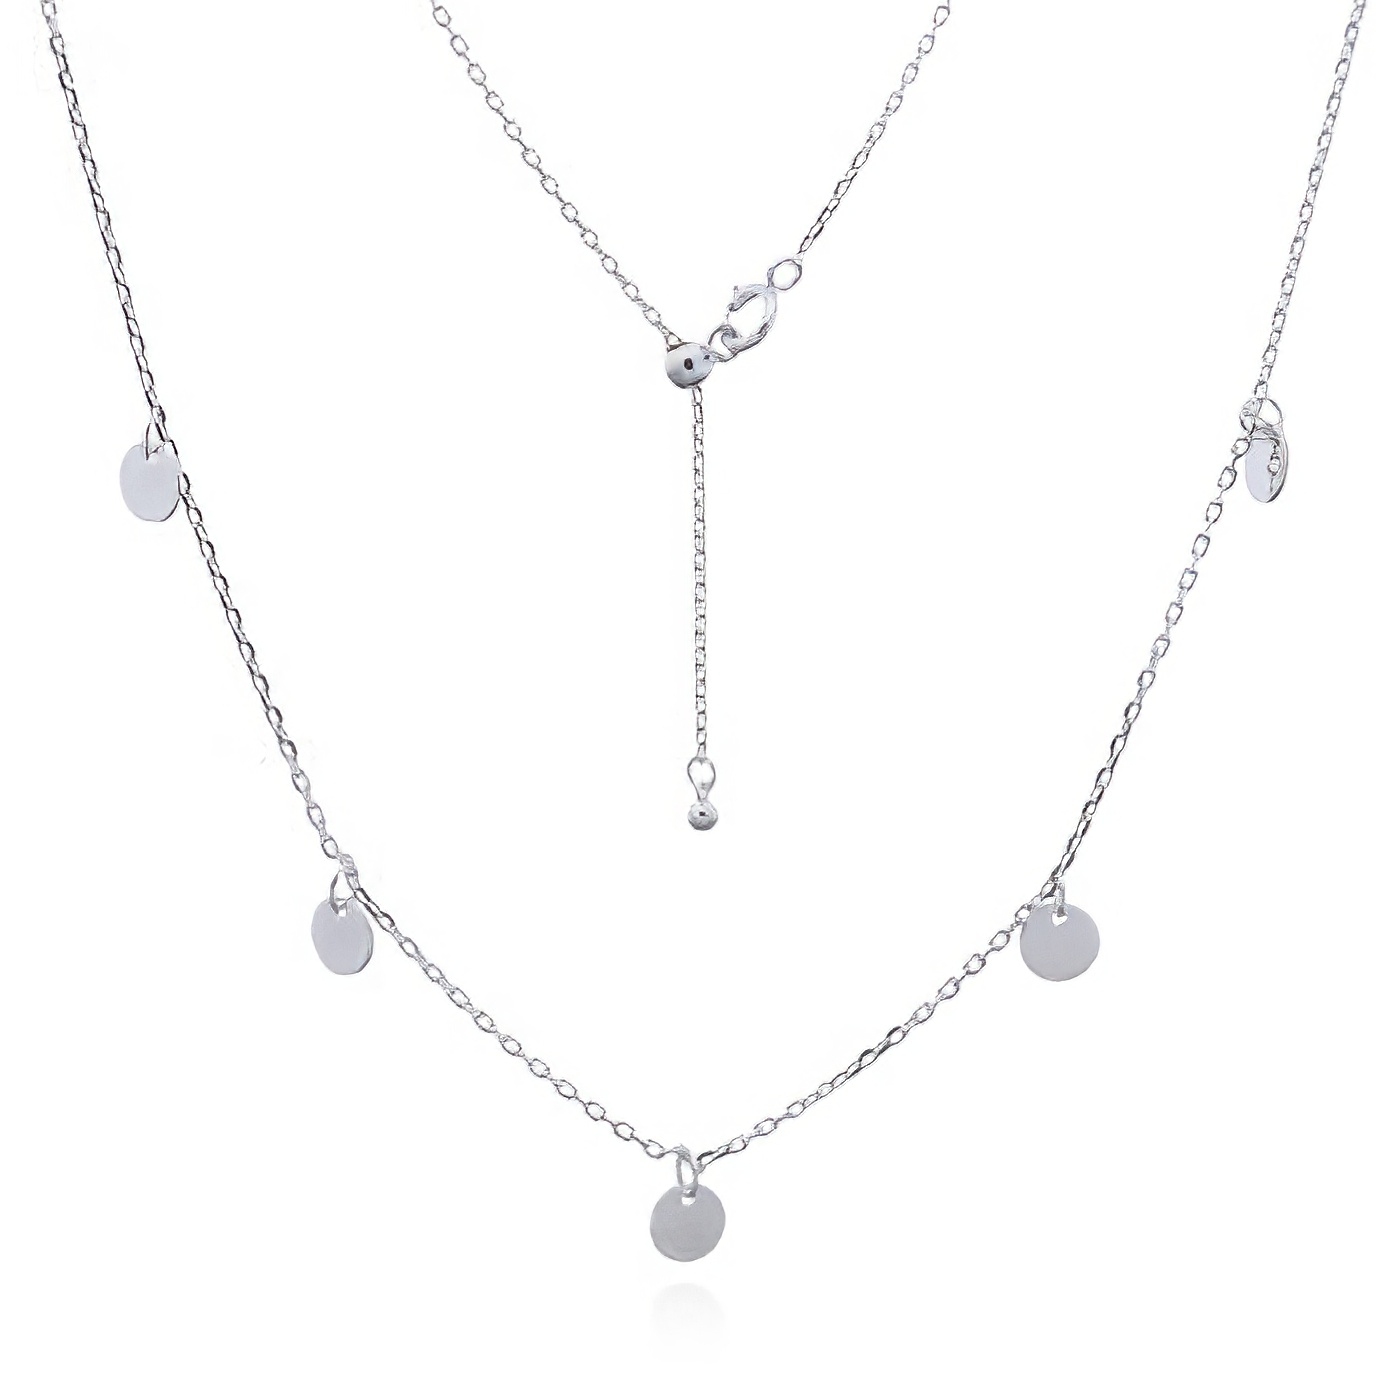 Circle Discs Threaded Silver Plated 925 Chain Necklace by BeYindi 